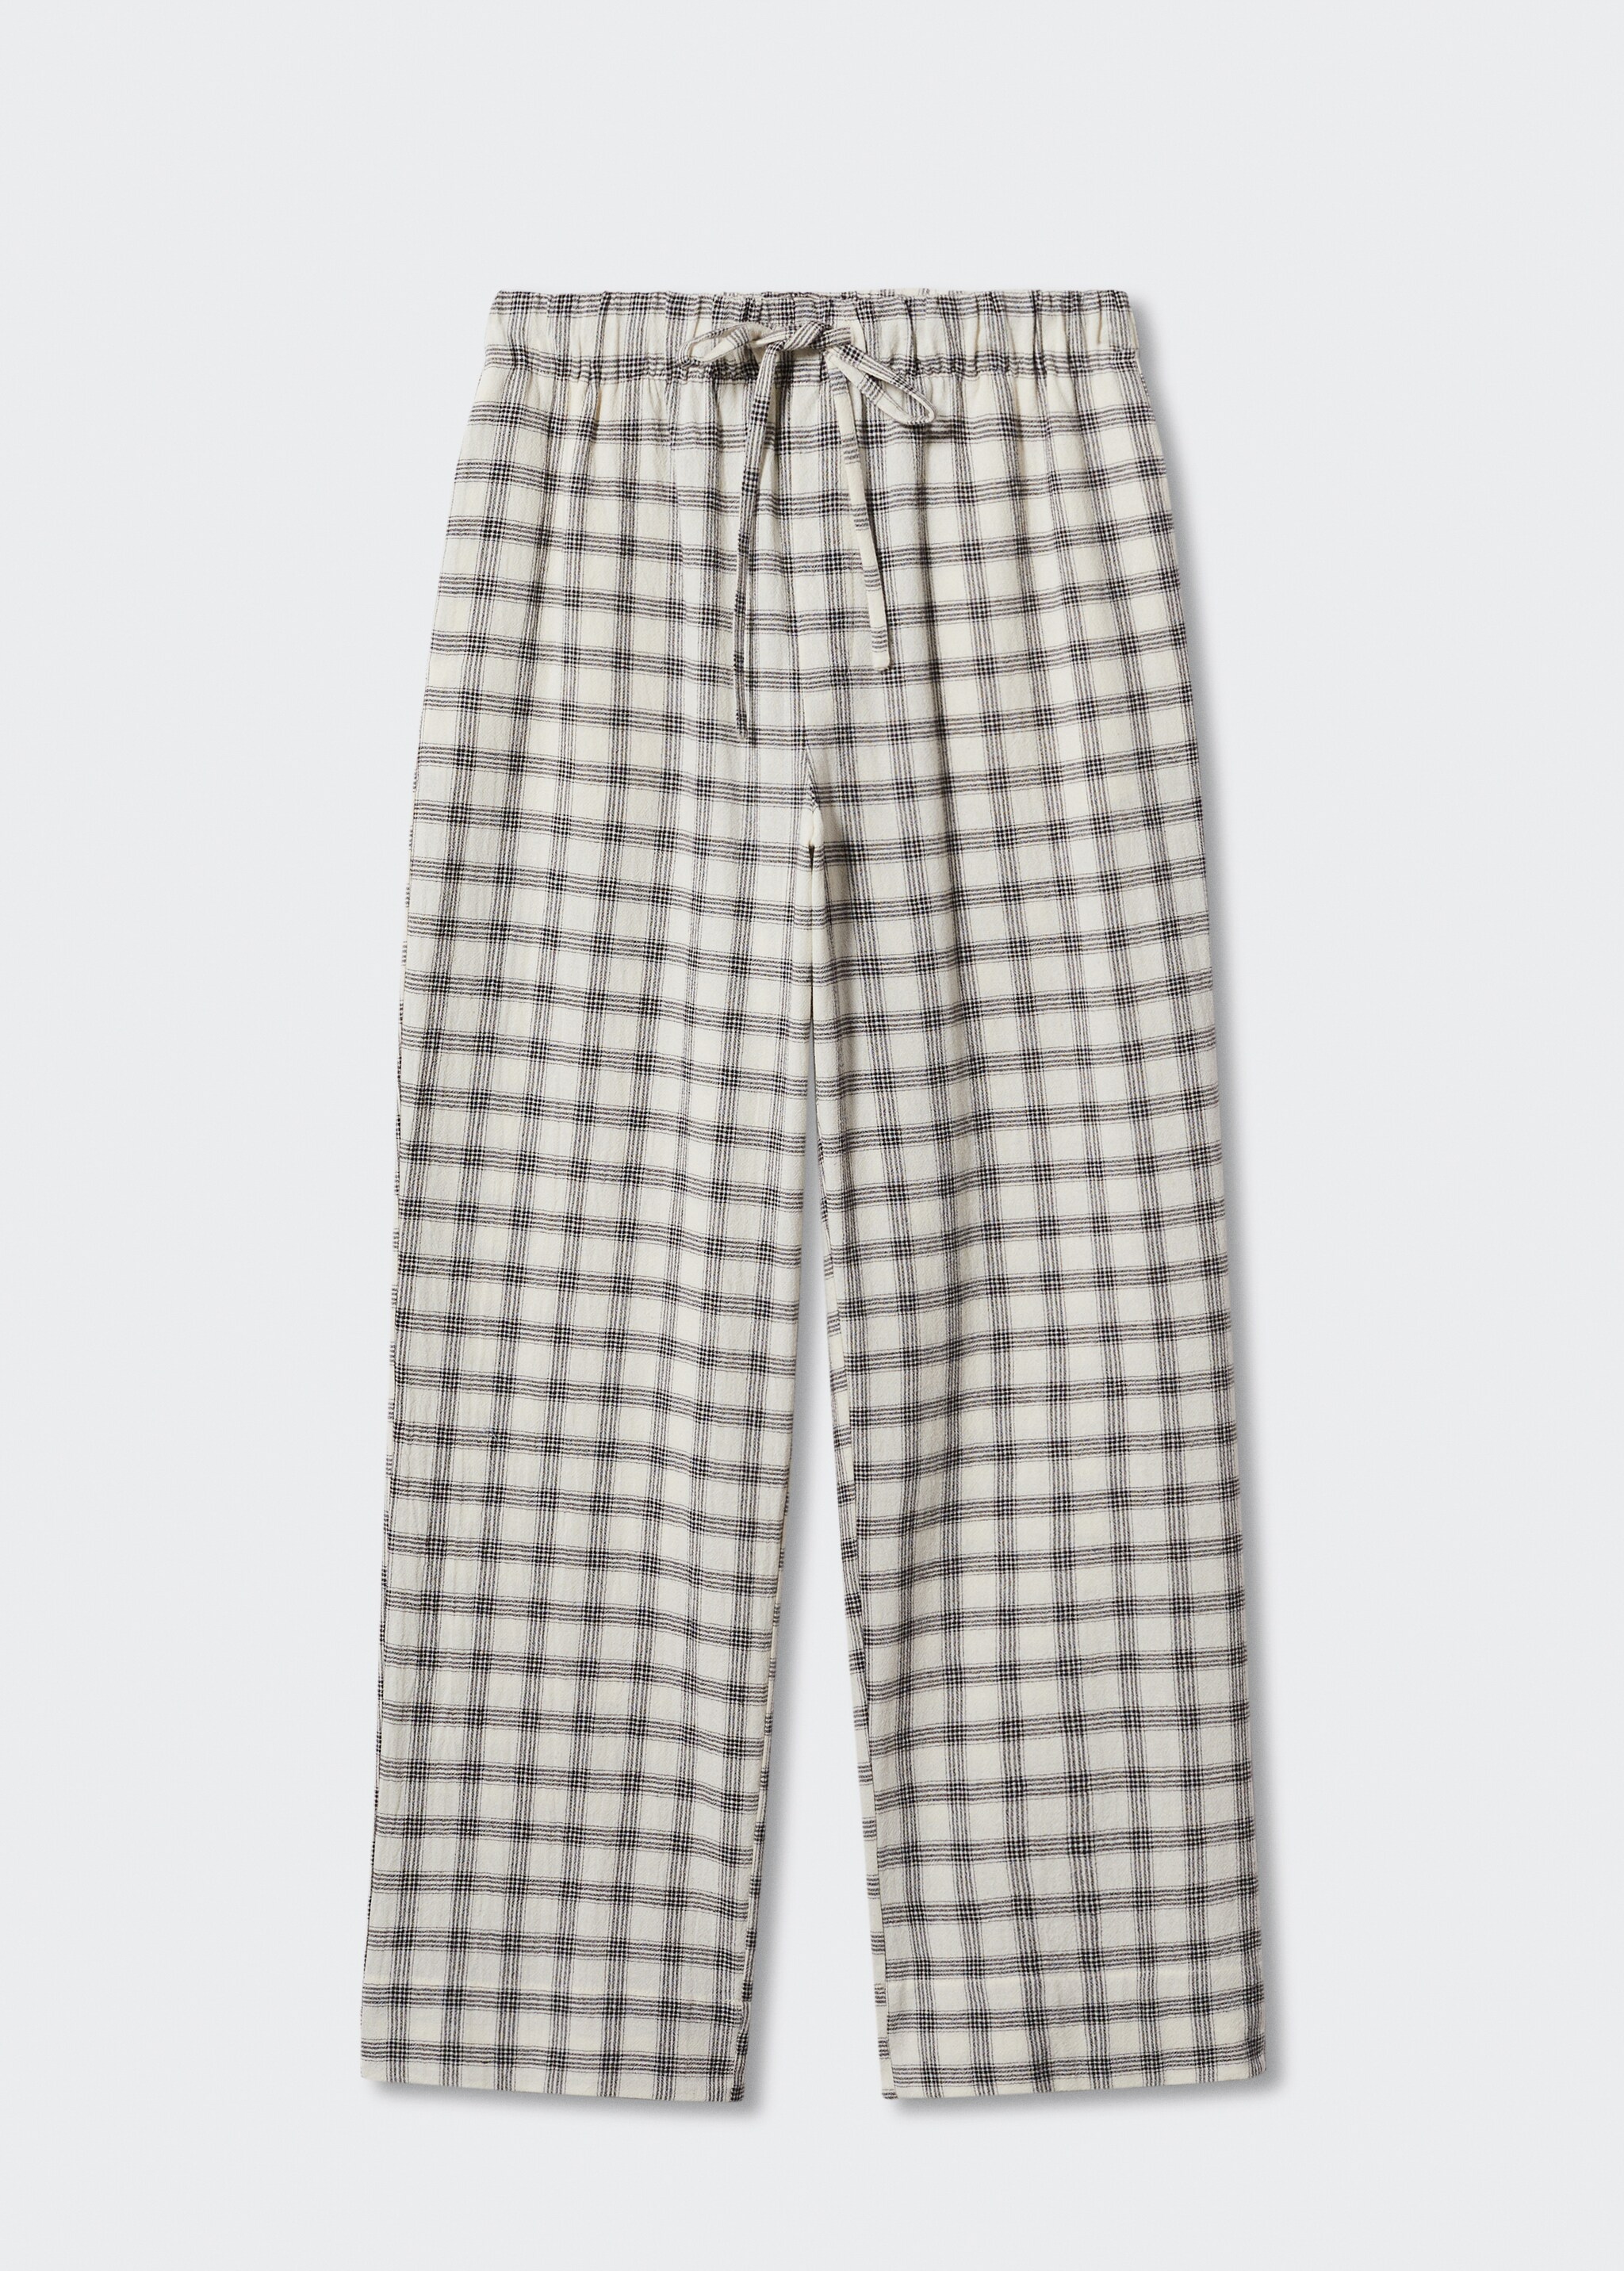 Flannel cotton pyjama trousers - Article without model